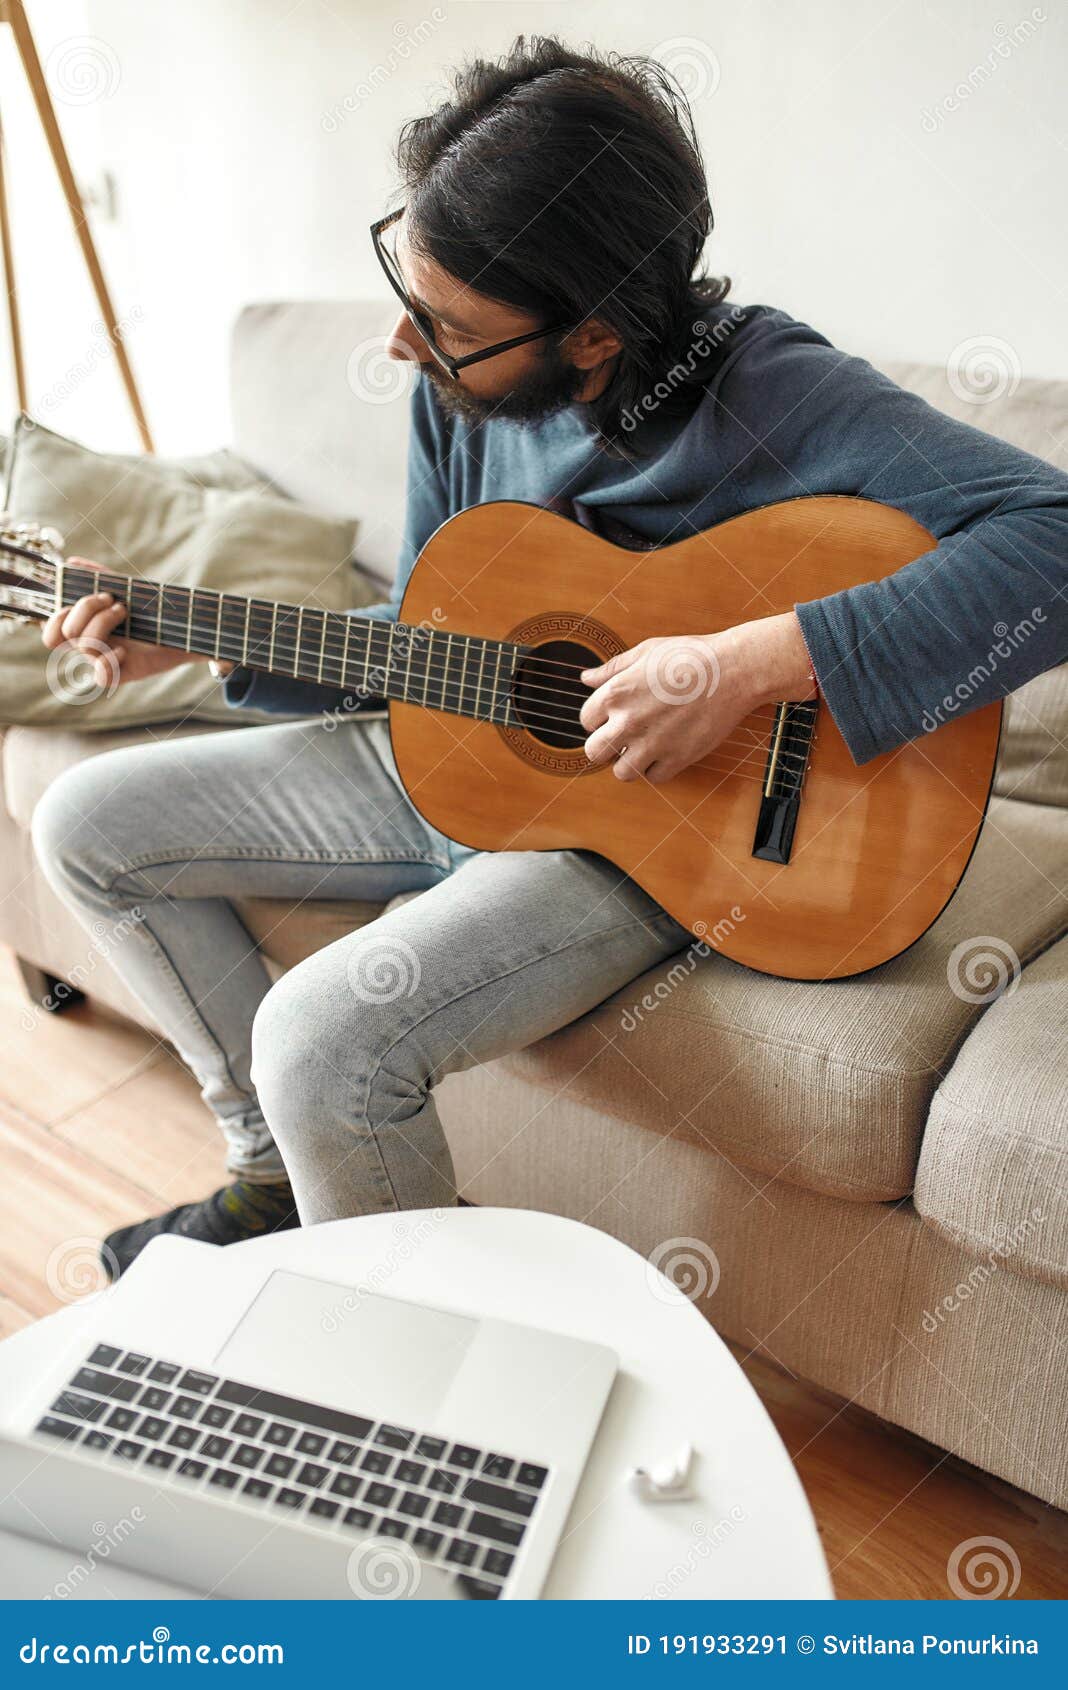 New Skill Young Focused Man Sitting On Sofa At Home And Playing Acoustic Guitar Watching Online Music Course On Laptop Stock Image Image Of Covid19 Guitarist